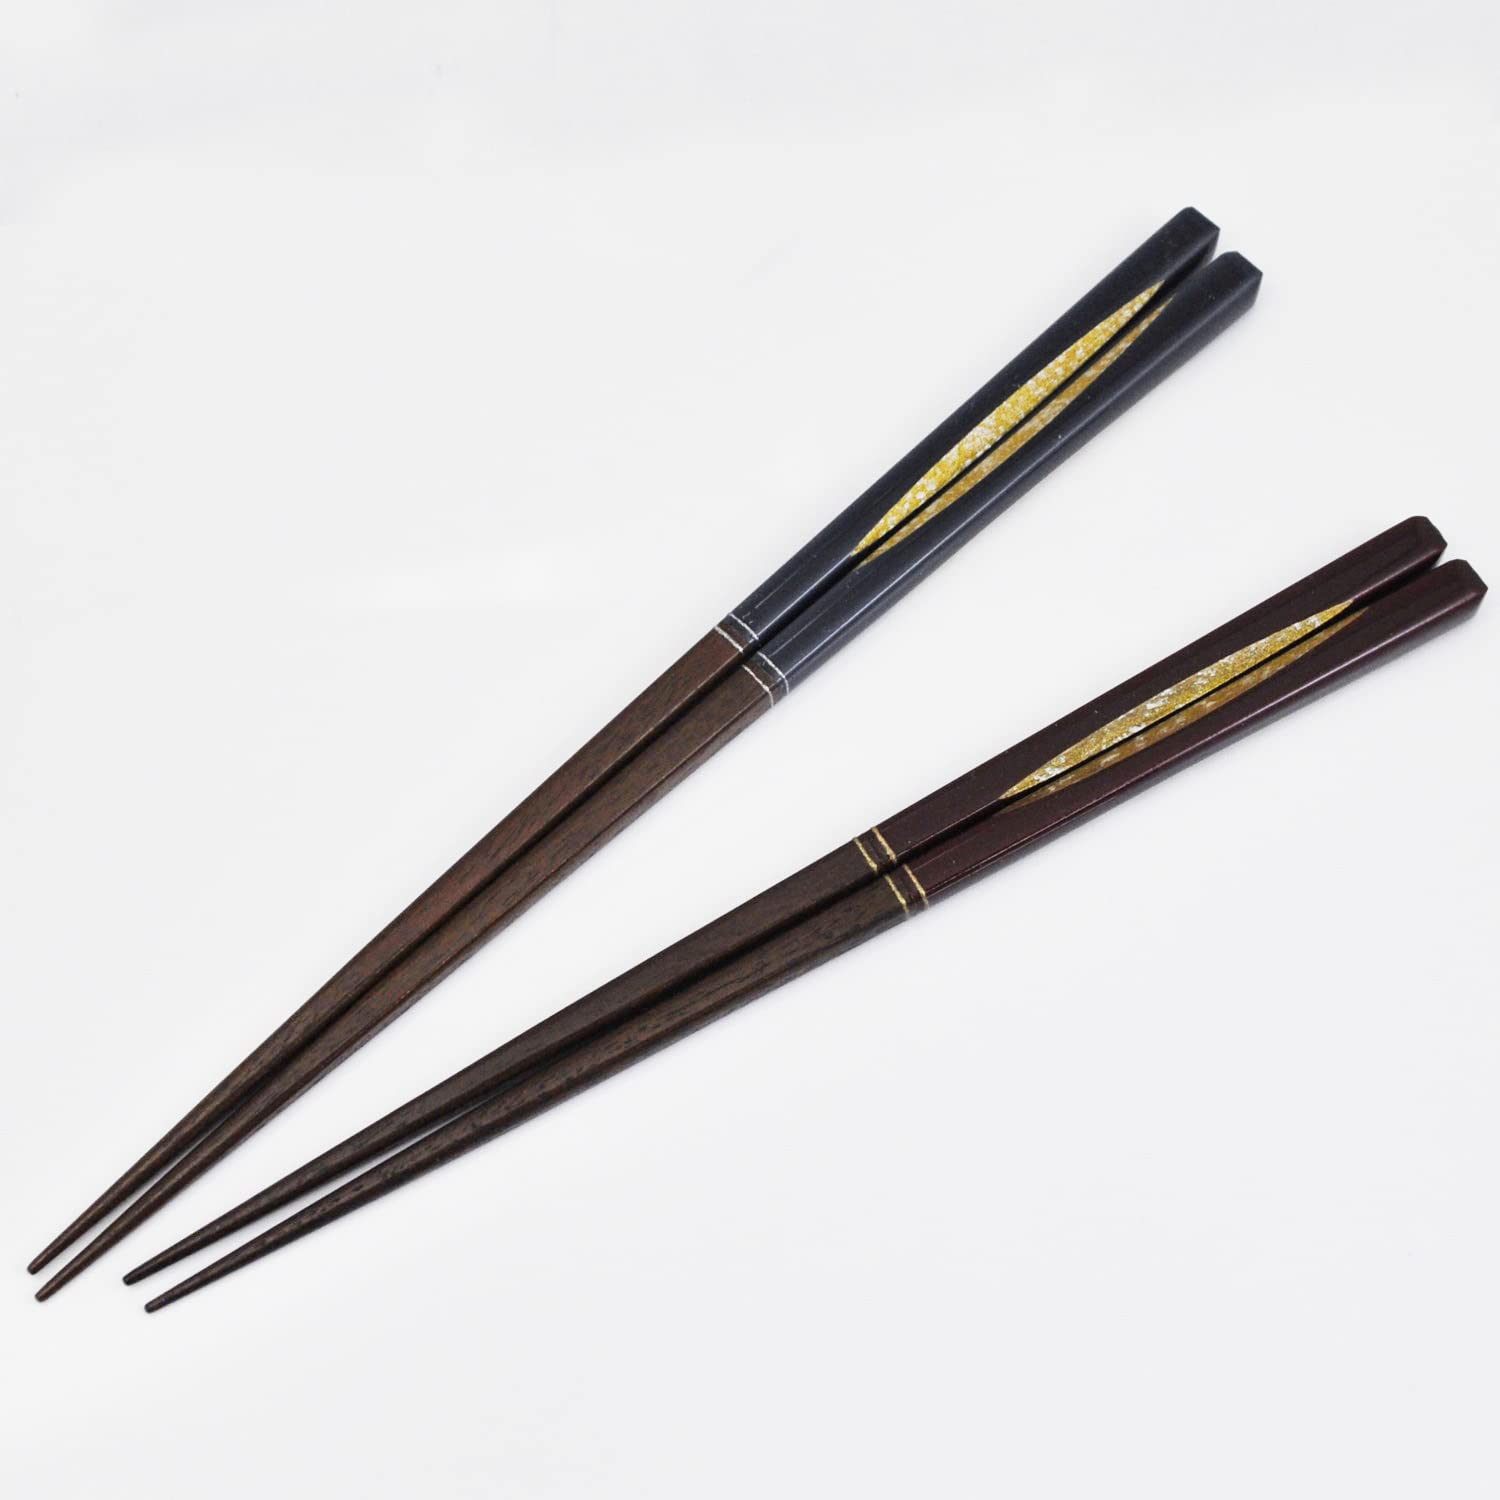 Isso Husband and Wife Both Using Japanese Chopsticks Set Designed with Dream Drops Boxed in Paulownia Wood.